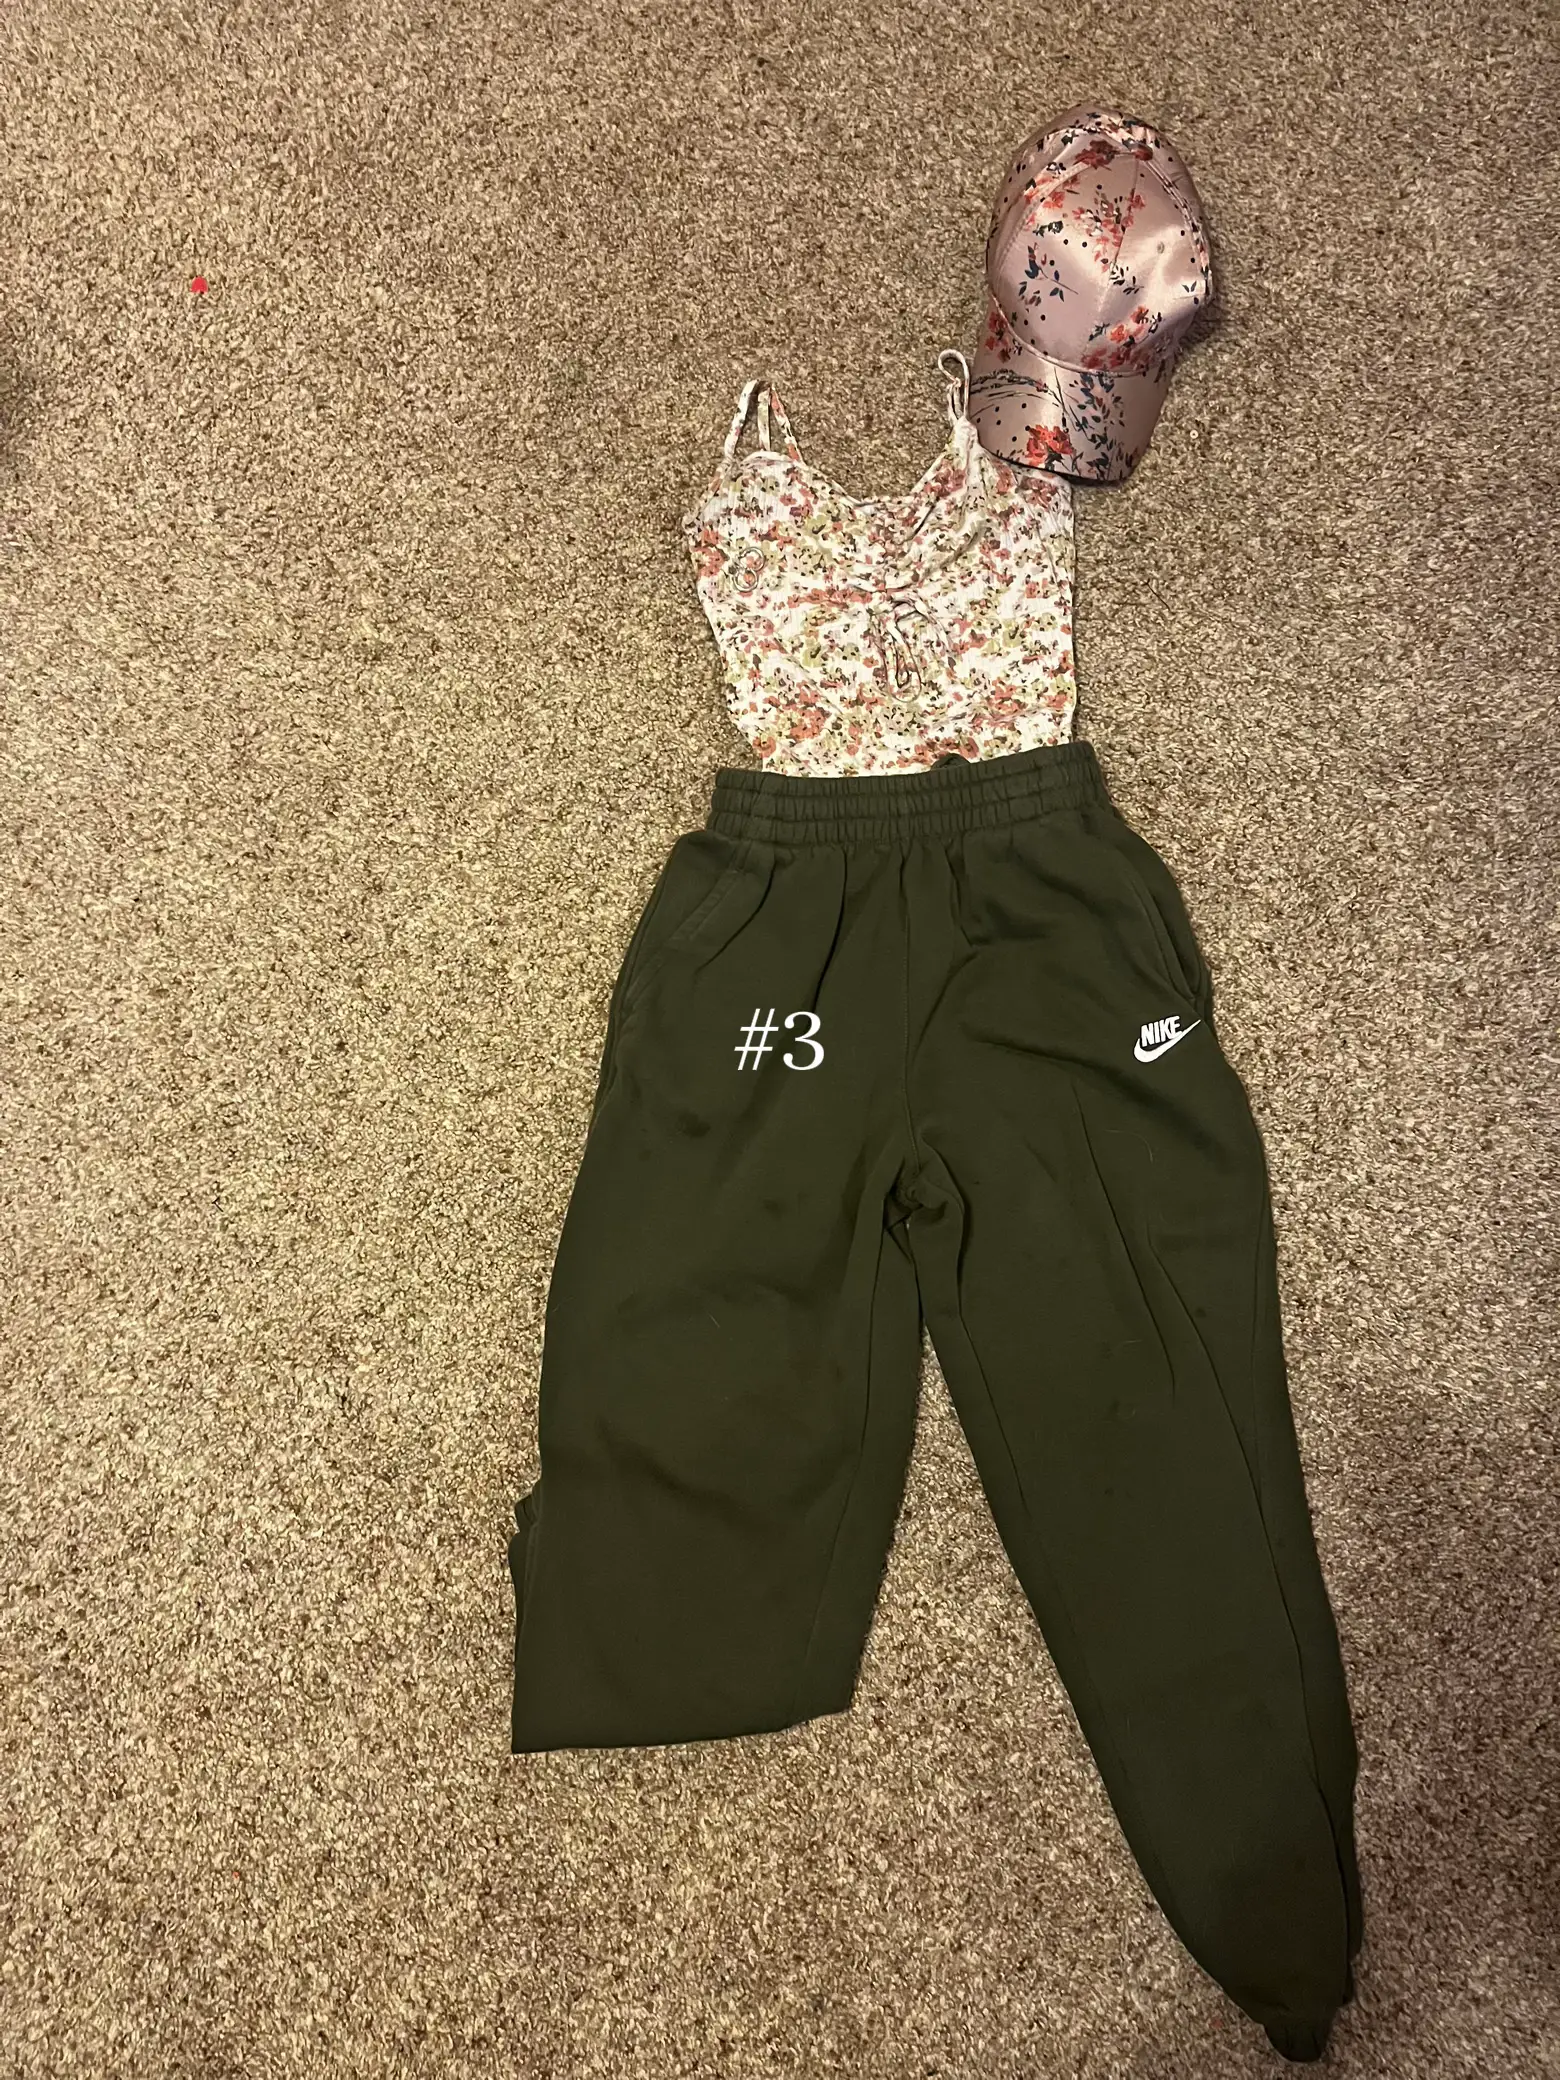 outfit idea for nike cargo sweatpants!! omg this is so cuteee